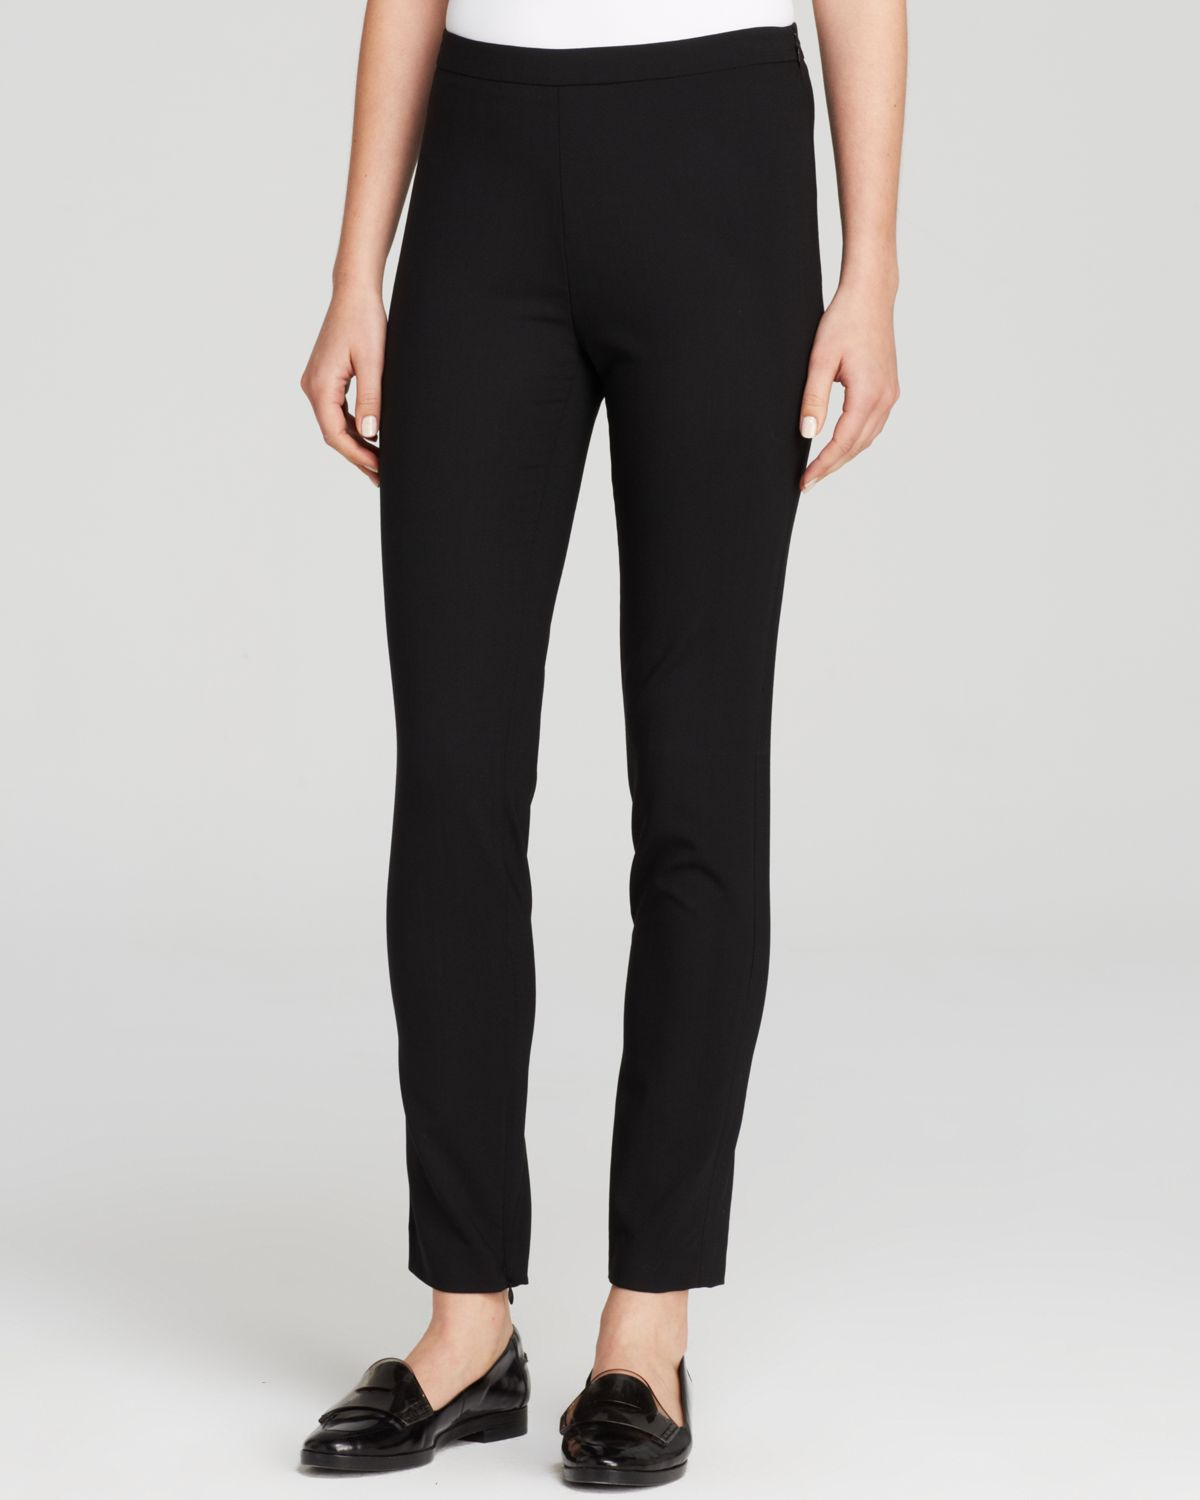 Theory Wool Pants - High-waisted Skinny Edition in Black - Lyst